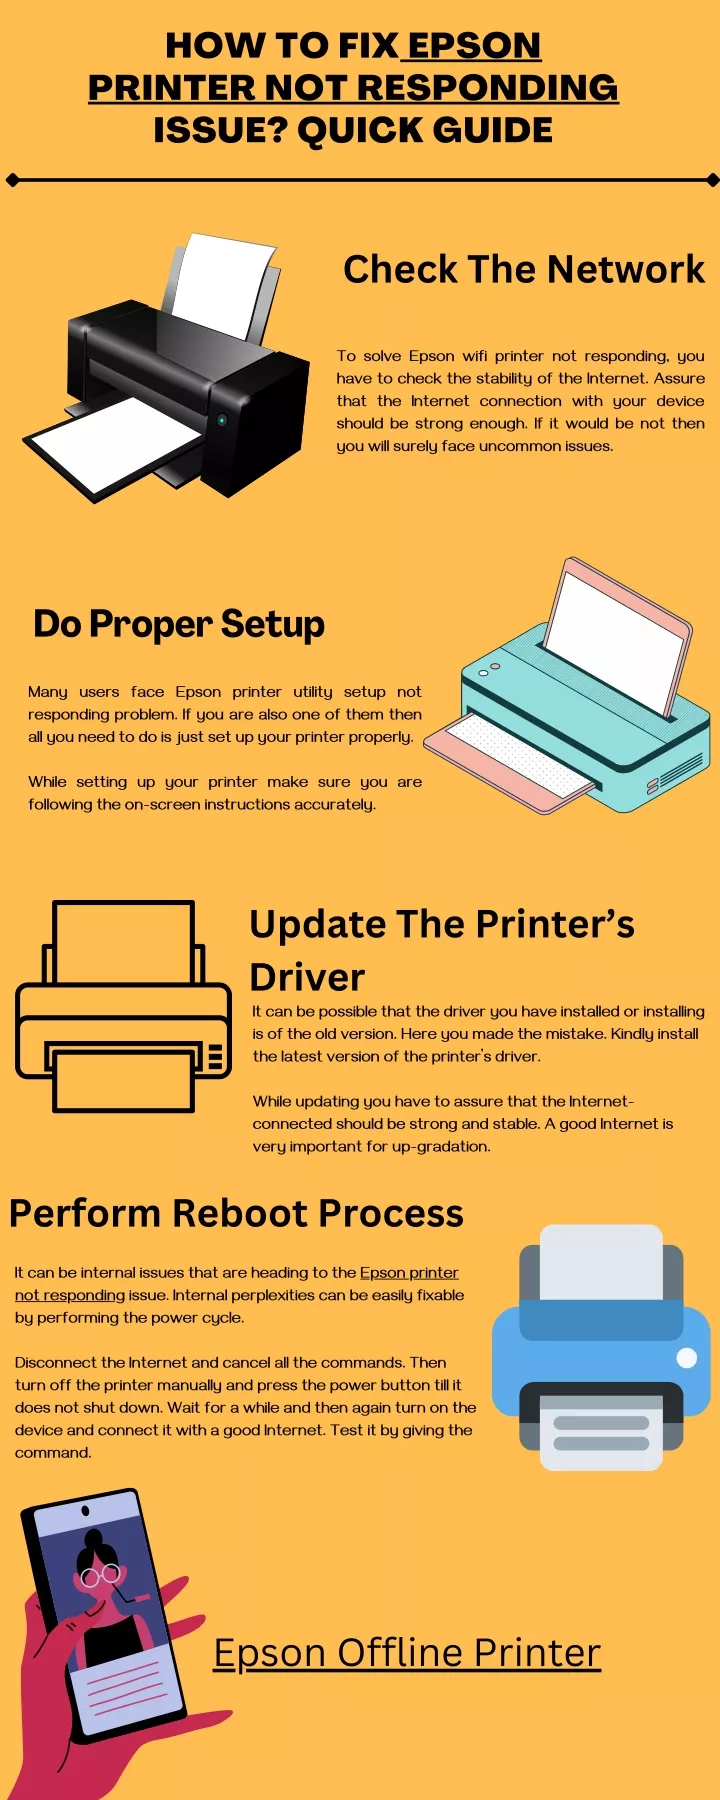 Ppt How To Fix Epson Printer Not Responding Issue Quick Guide Powerpoint Presentation Id 7297